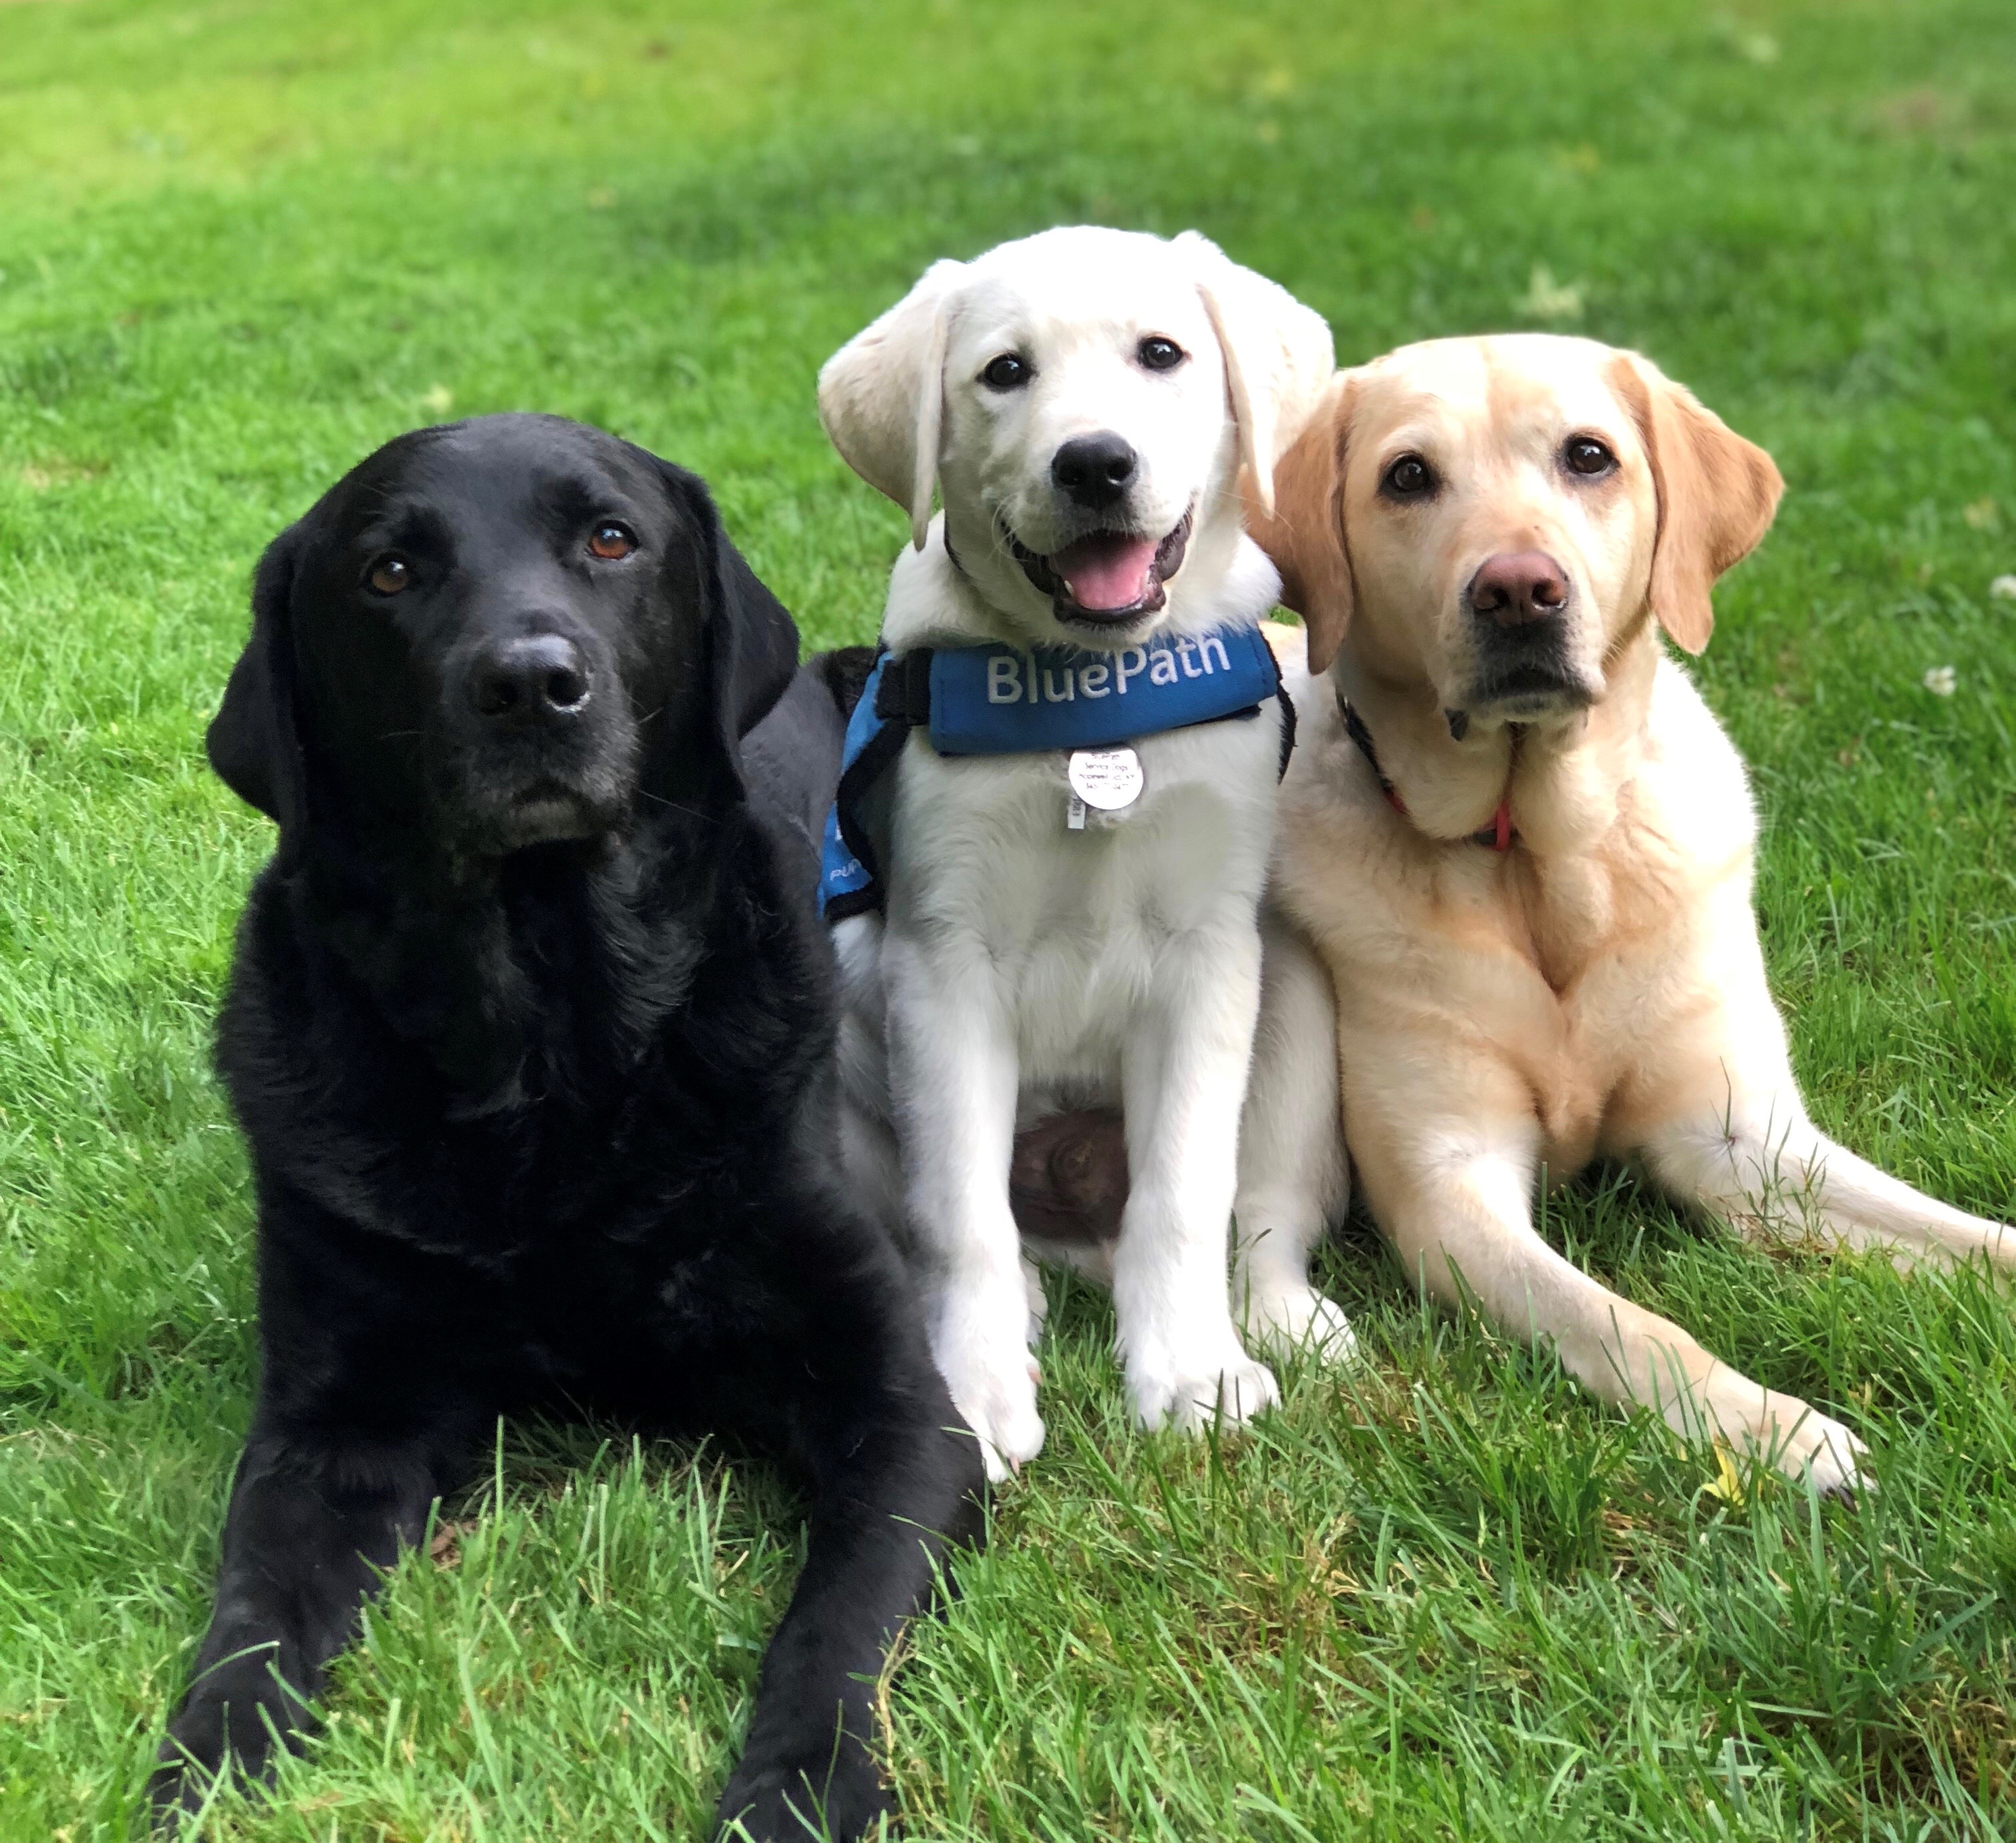 Sherman (center) and friends